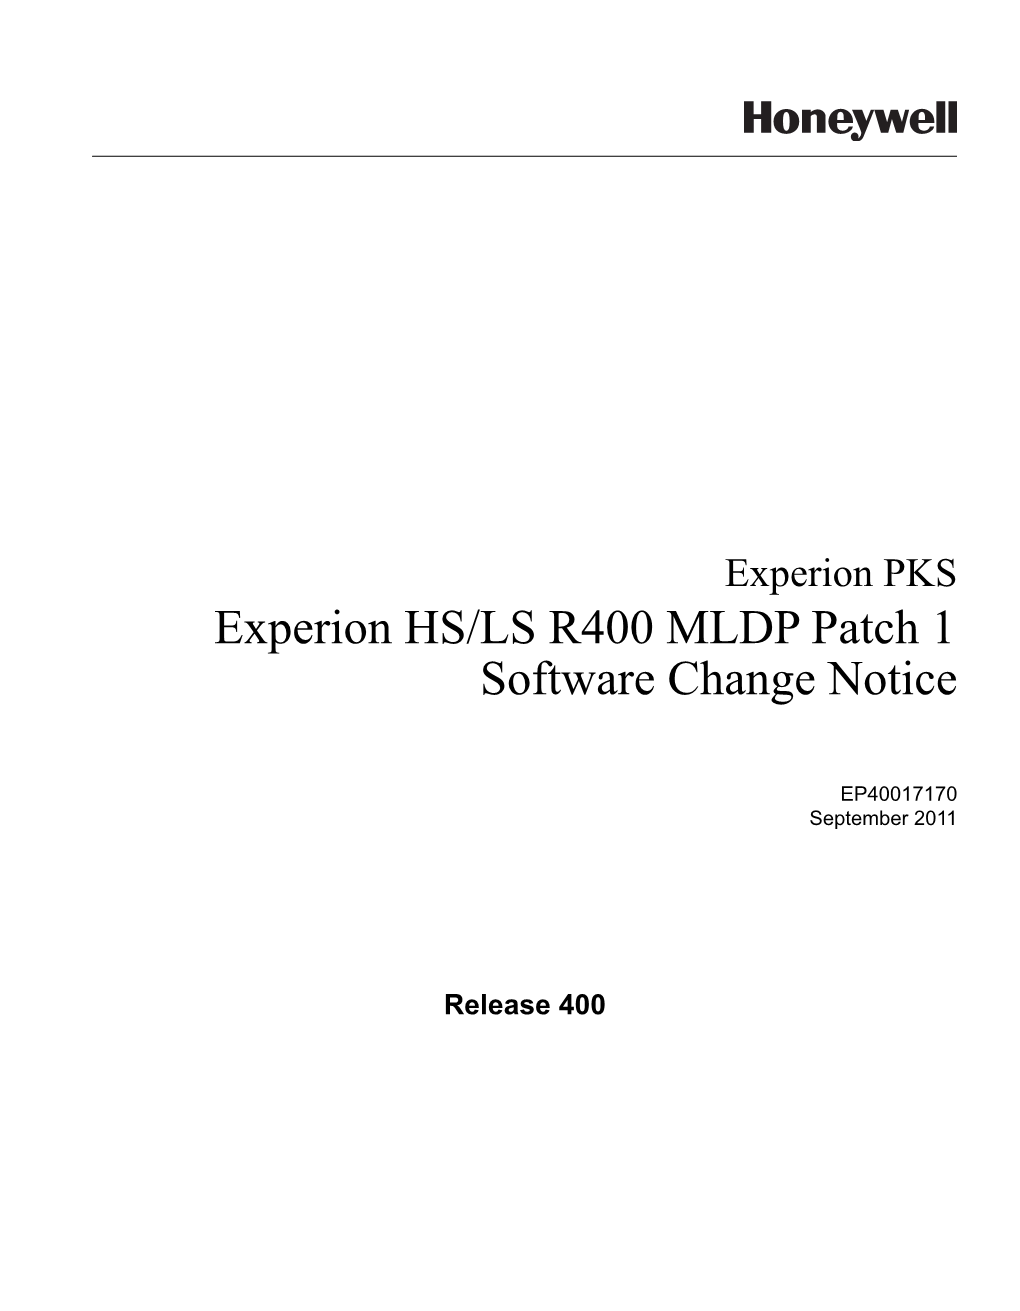 Experion HS/LS R400 MLDP Patch 1 Software Change Notice